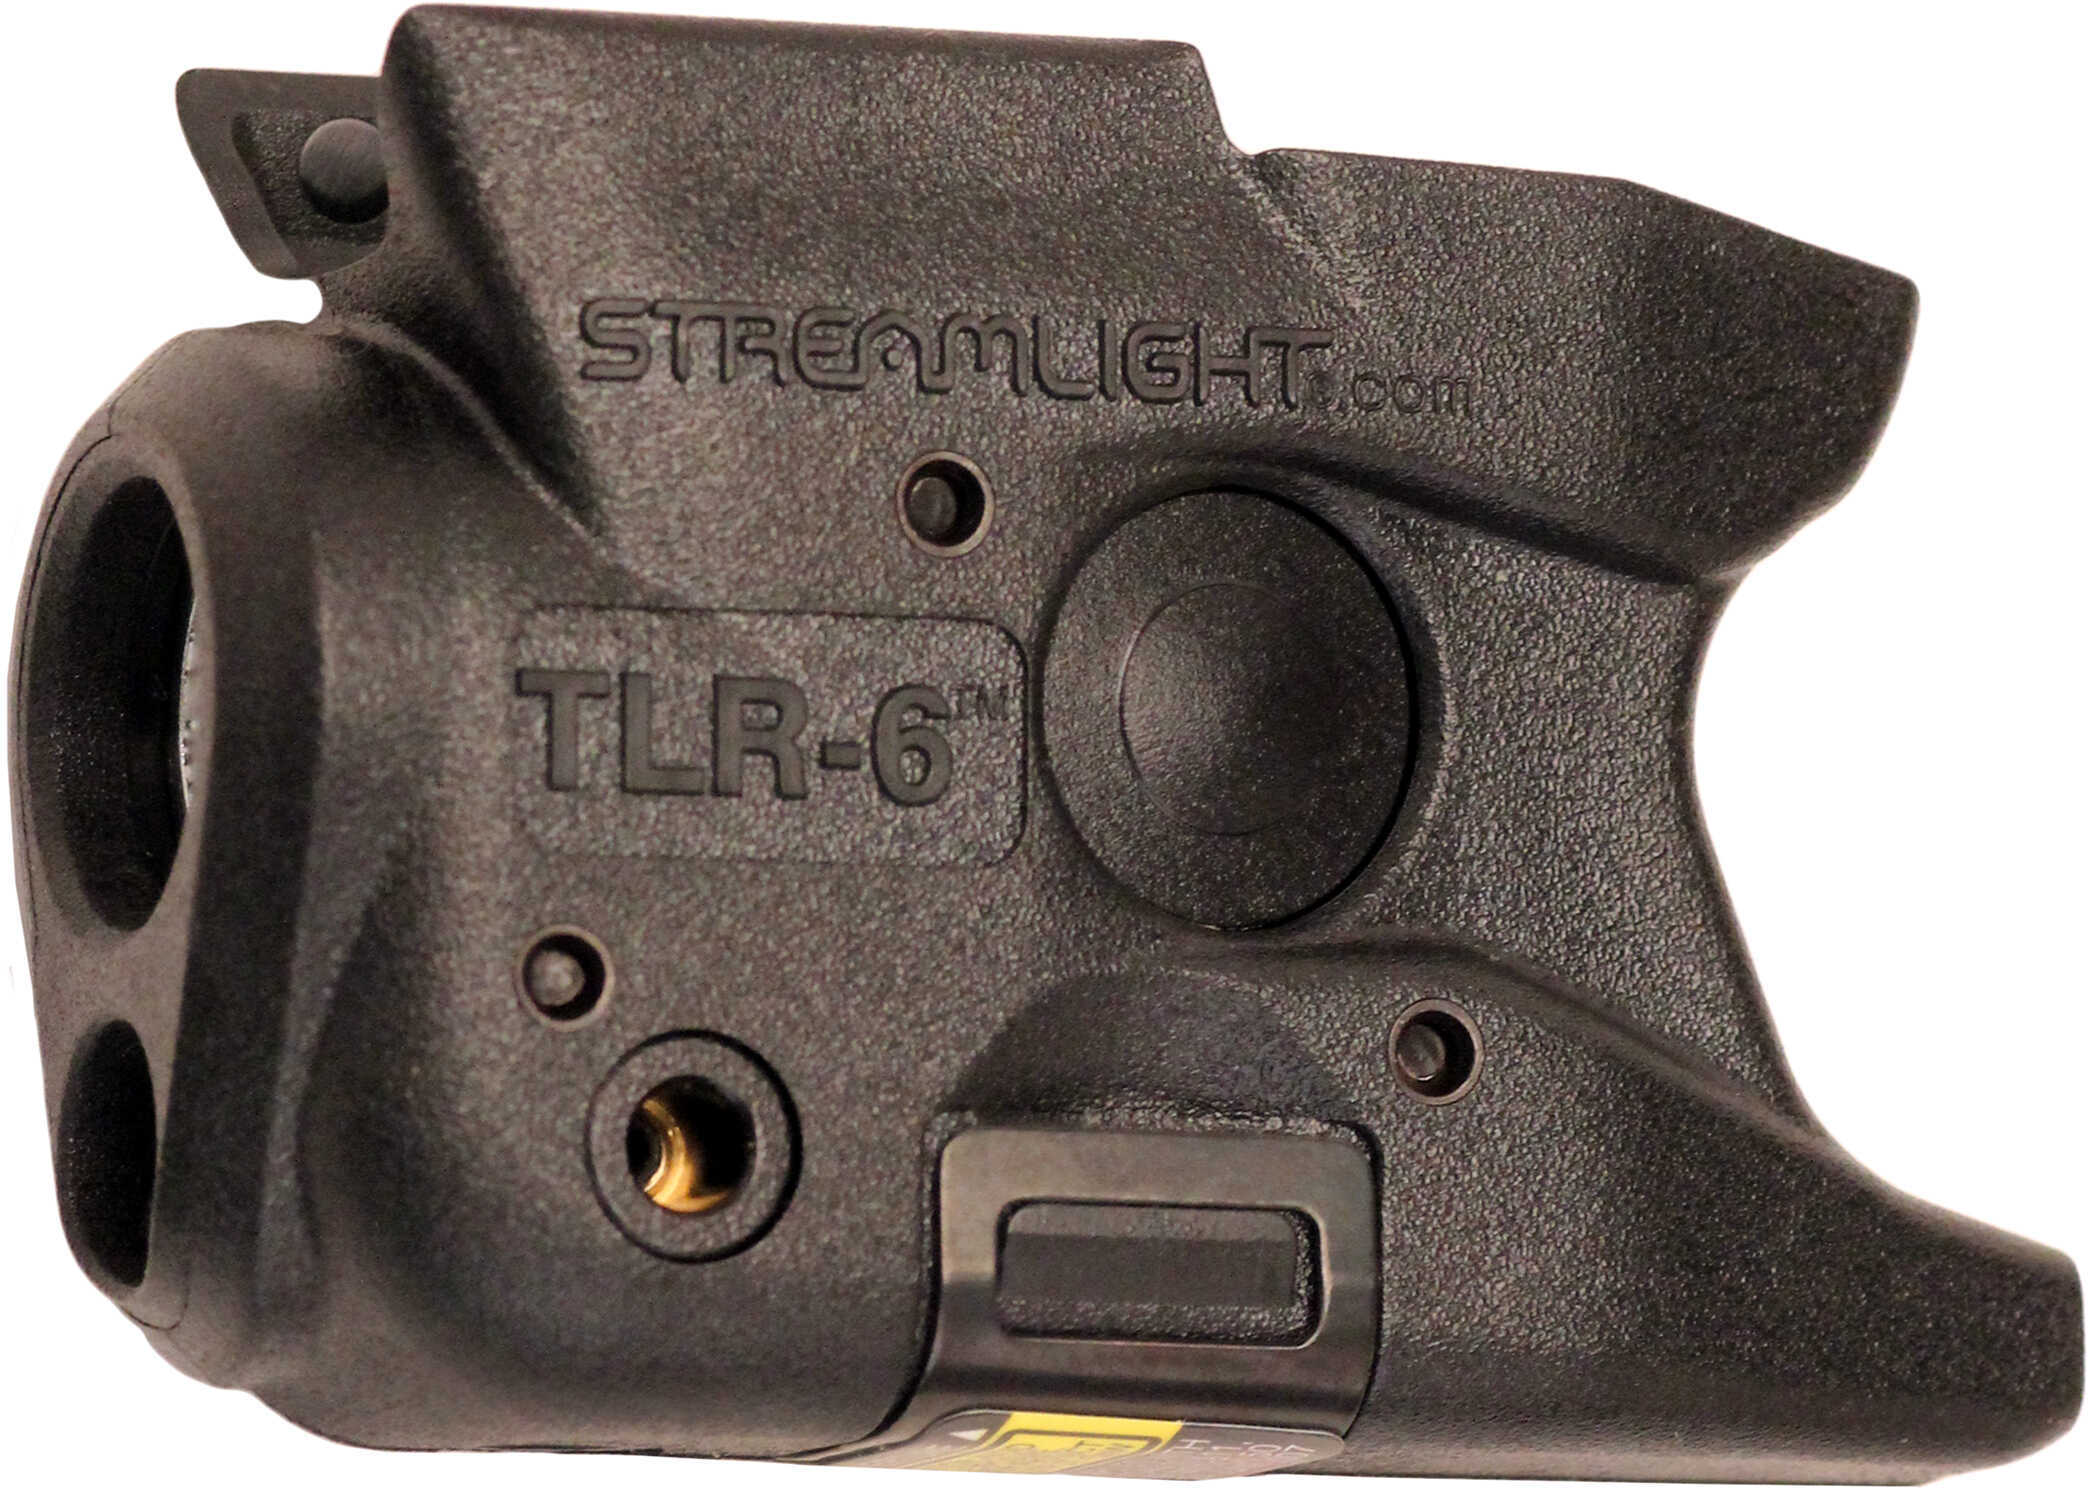 Streamlight TLR-6 Tac Light w/laser For S&W M&P Shield White LED and Red Laser Includes 2 CR 1/3N Lithium Batteries Blac